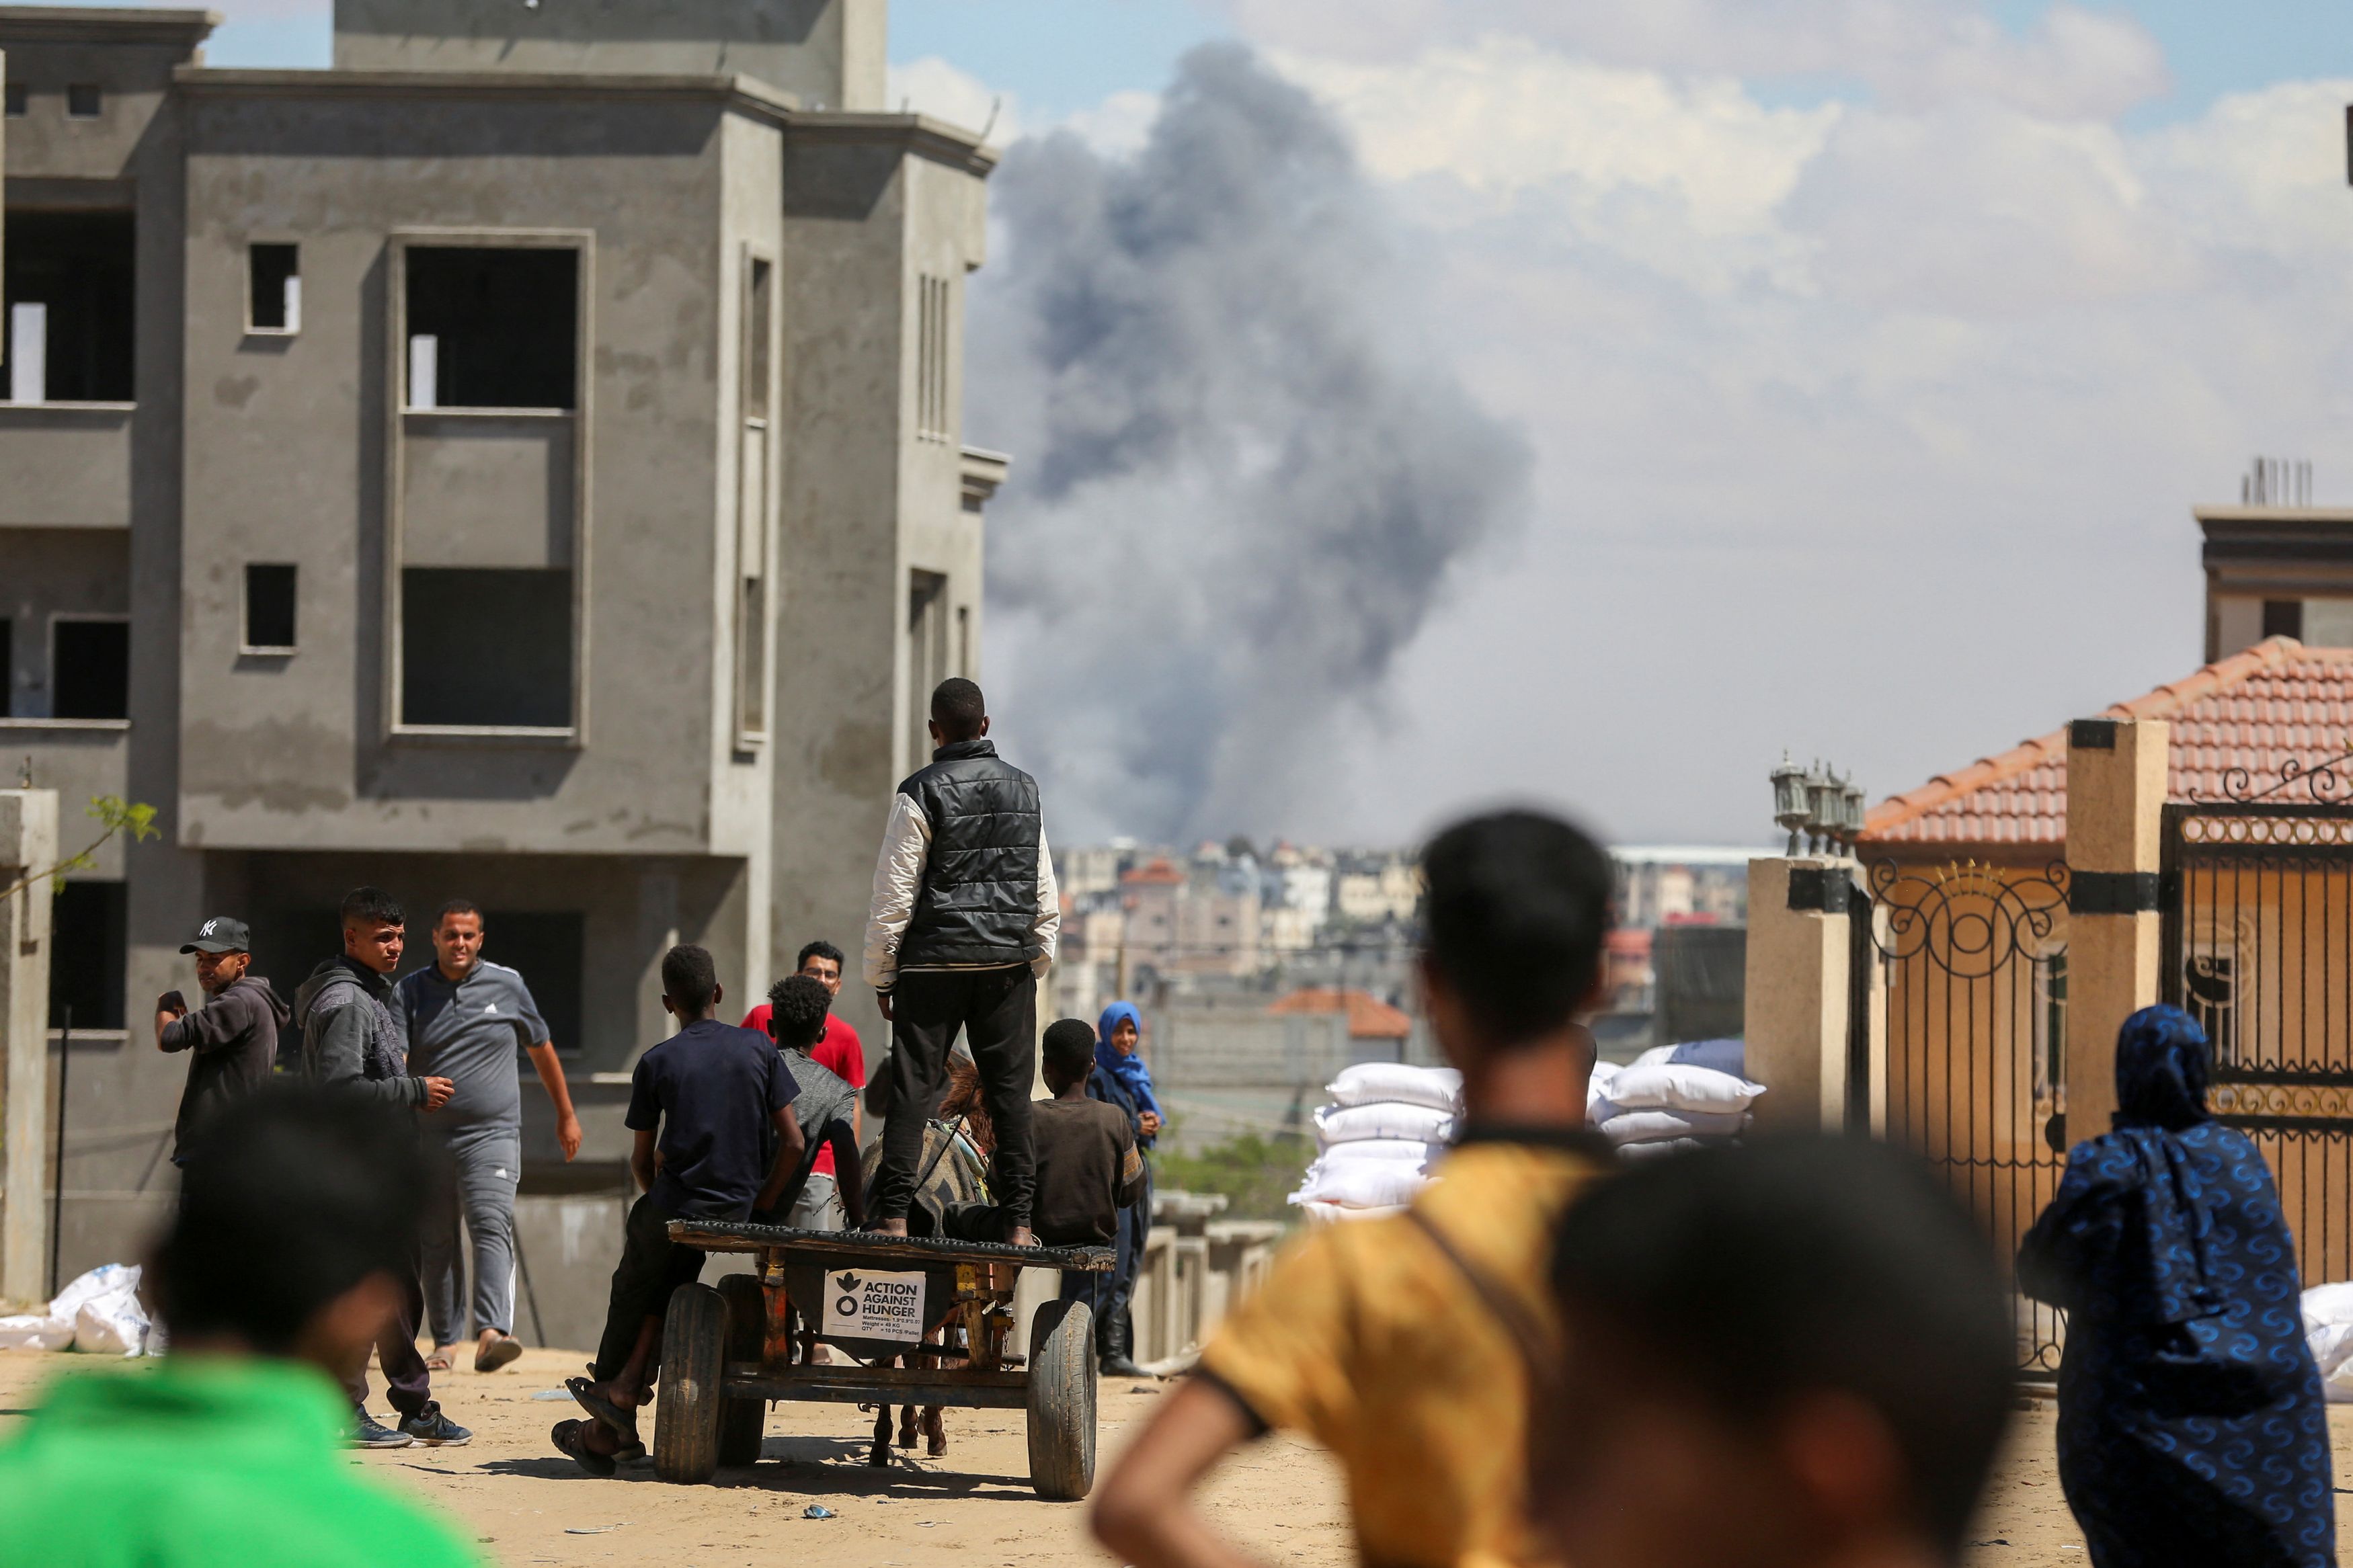 visualizing what an attack on rafah means for civilians